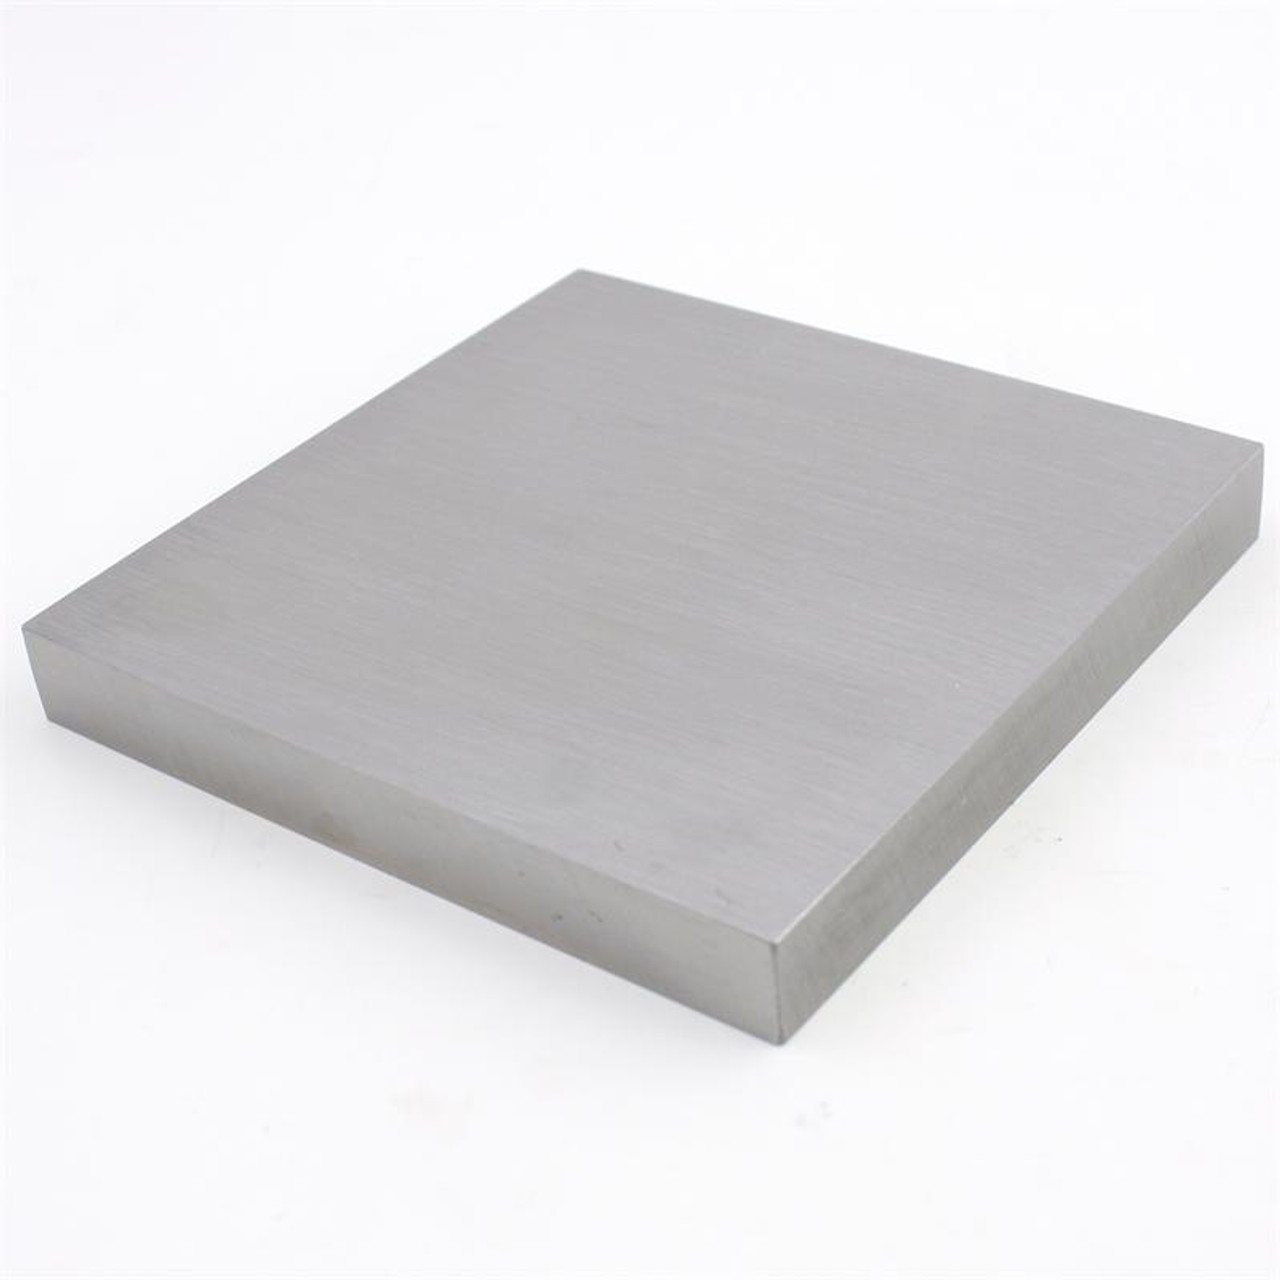 Steel Bench Block Durable Flat Jewelry Making Tool for Jewelry